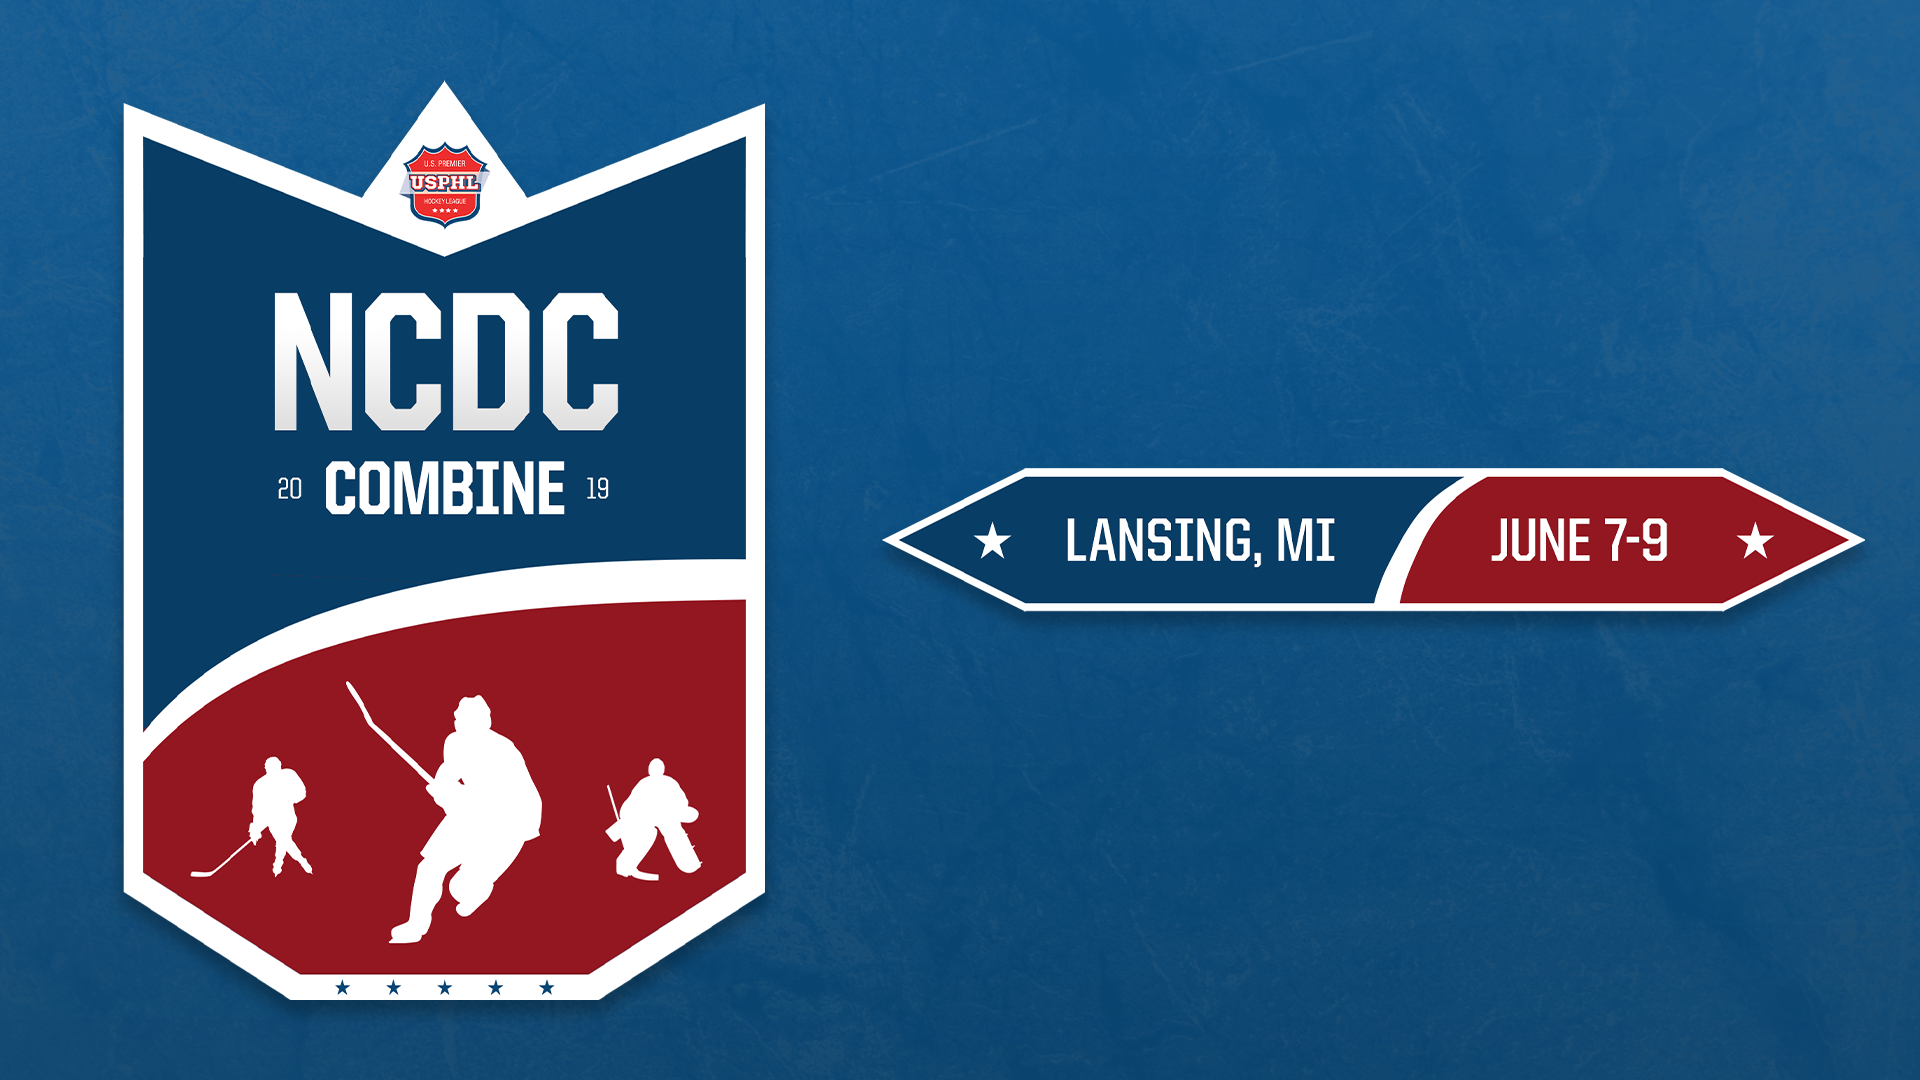 NCDC Midwest Combine coming to Lansing, Michigan from June 7-9